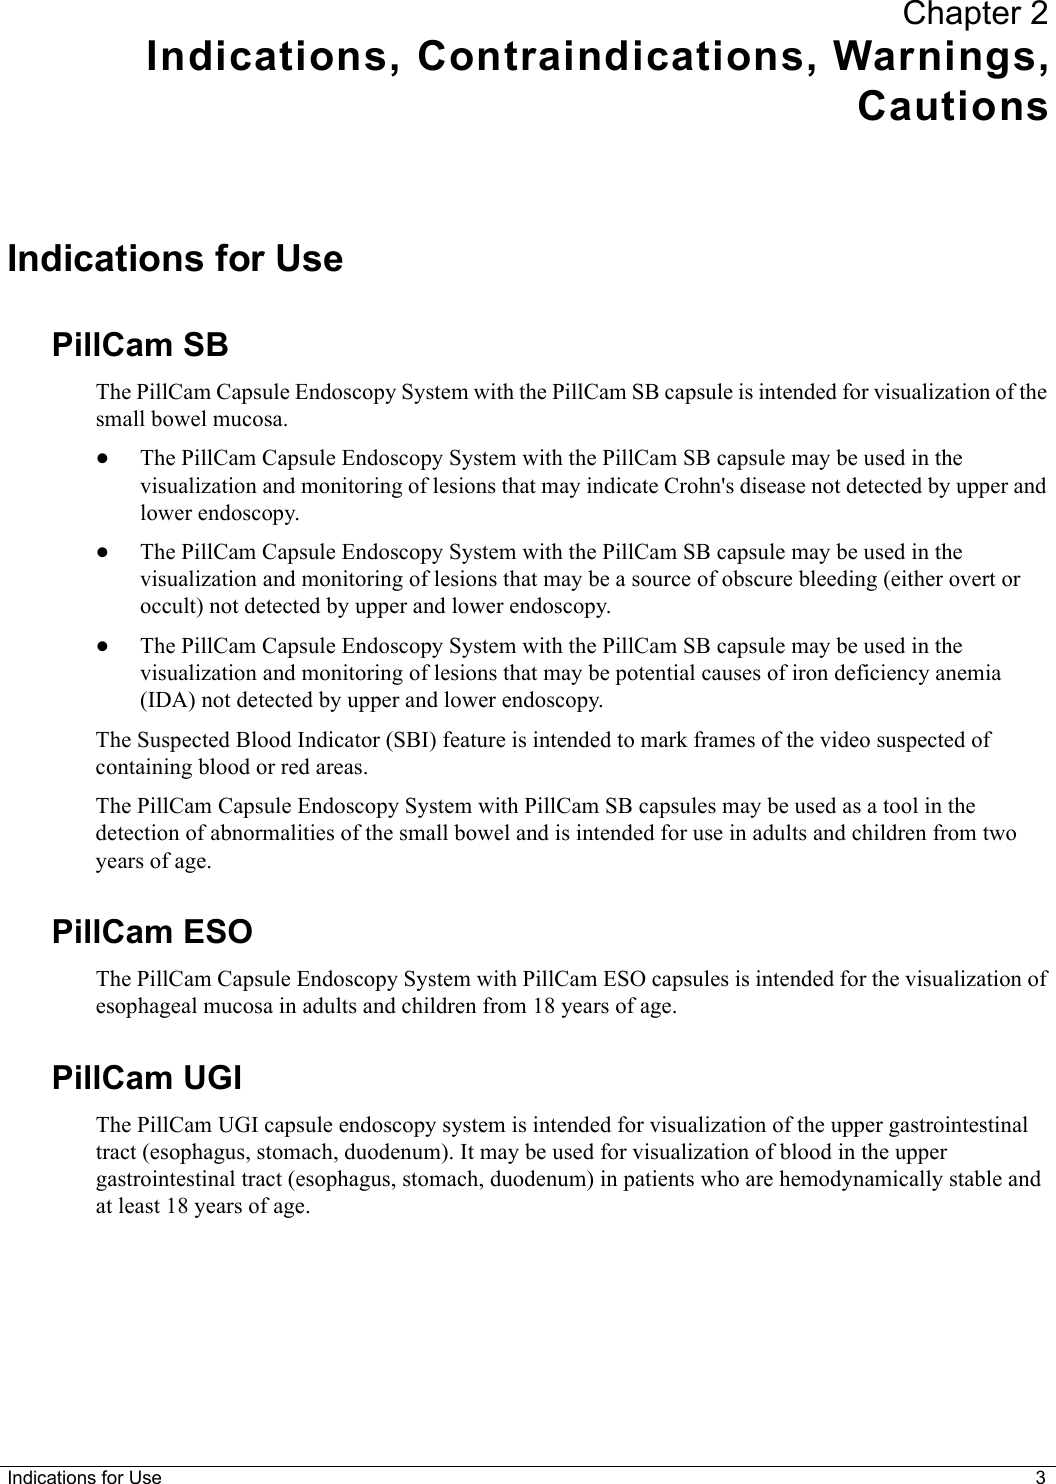 Indications for Use 3Chapter 2Indications, Contraindications, Warnings,CautionsIndications for UsePillCam SBThe PillCam Capsule Endoscopy System with the PillCam SB capsule is intended for visualization of the small bowel mucosa.•The PillCam Capsule Endoscopy System with the PillCam SB capsule may be used in the visualization and monitoring of lesions that may indicate Crohn&apos;s disease not detected by upper and lower endoscopy.•The PillCam Capsule Endoscopy System with the PillCam SB capsule may be used in the visualization and monitoring of lesions that may be a source of obscure bleeding (either overt or occult) not detected by upper and lower endoscopy.•The PillCam Capsule Endoscopy System with the PillCam SB capsule may be used in the visualization and monitoring of lesions that may be potential causes of iron deficiency anemia (IDA) not detected by upper and lower endoscopy.The Suspected Blood Indicator (SBI) feature is intended to mark frames of the video suspected of containing blood or red areas.The PillCam Capsule Endoscopy System with PillCam SB capsules may be used as a tool in the detection of abnormalities of the small bowel and is intended for use in adults and children from two years of age.PillCam ESOThe PillCam Capsule Endoscopy System with PillCam ESO capsules is intended for the visualization of esophageal mucosa in adults and children from 18 years of age.PillCam UGIThe PillCam UGI capsule endoscopy system is intended for visualization of the upper gastrointestinal tract (esophagus, stomach, duodenum). It may be used for visualization of blood in the upper gastrointestinal tract (esophagus, stomach, duodenum) in patients who are hemodynamically stable and at least 18 years of age. 